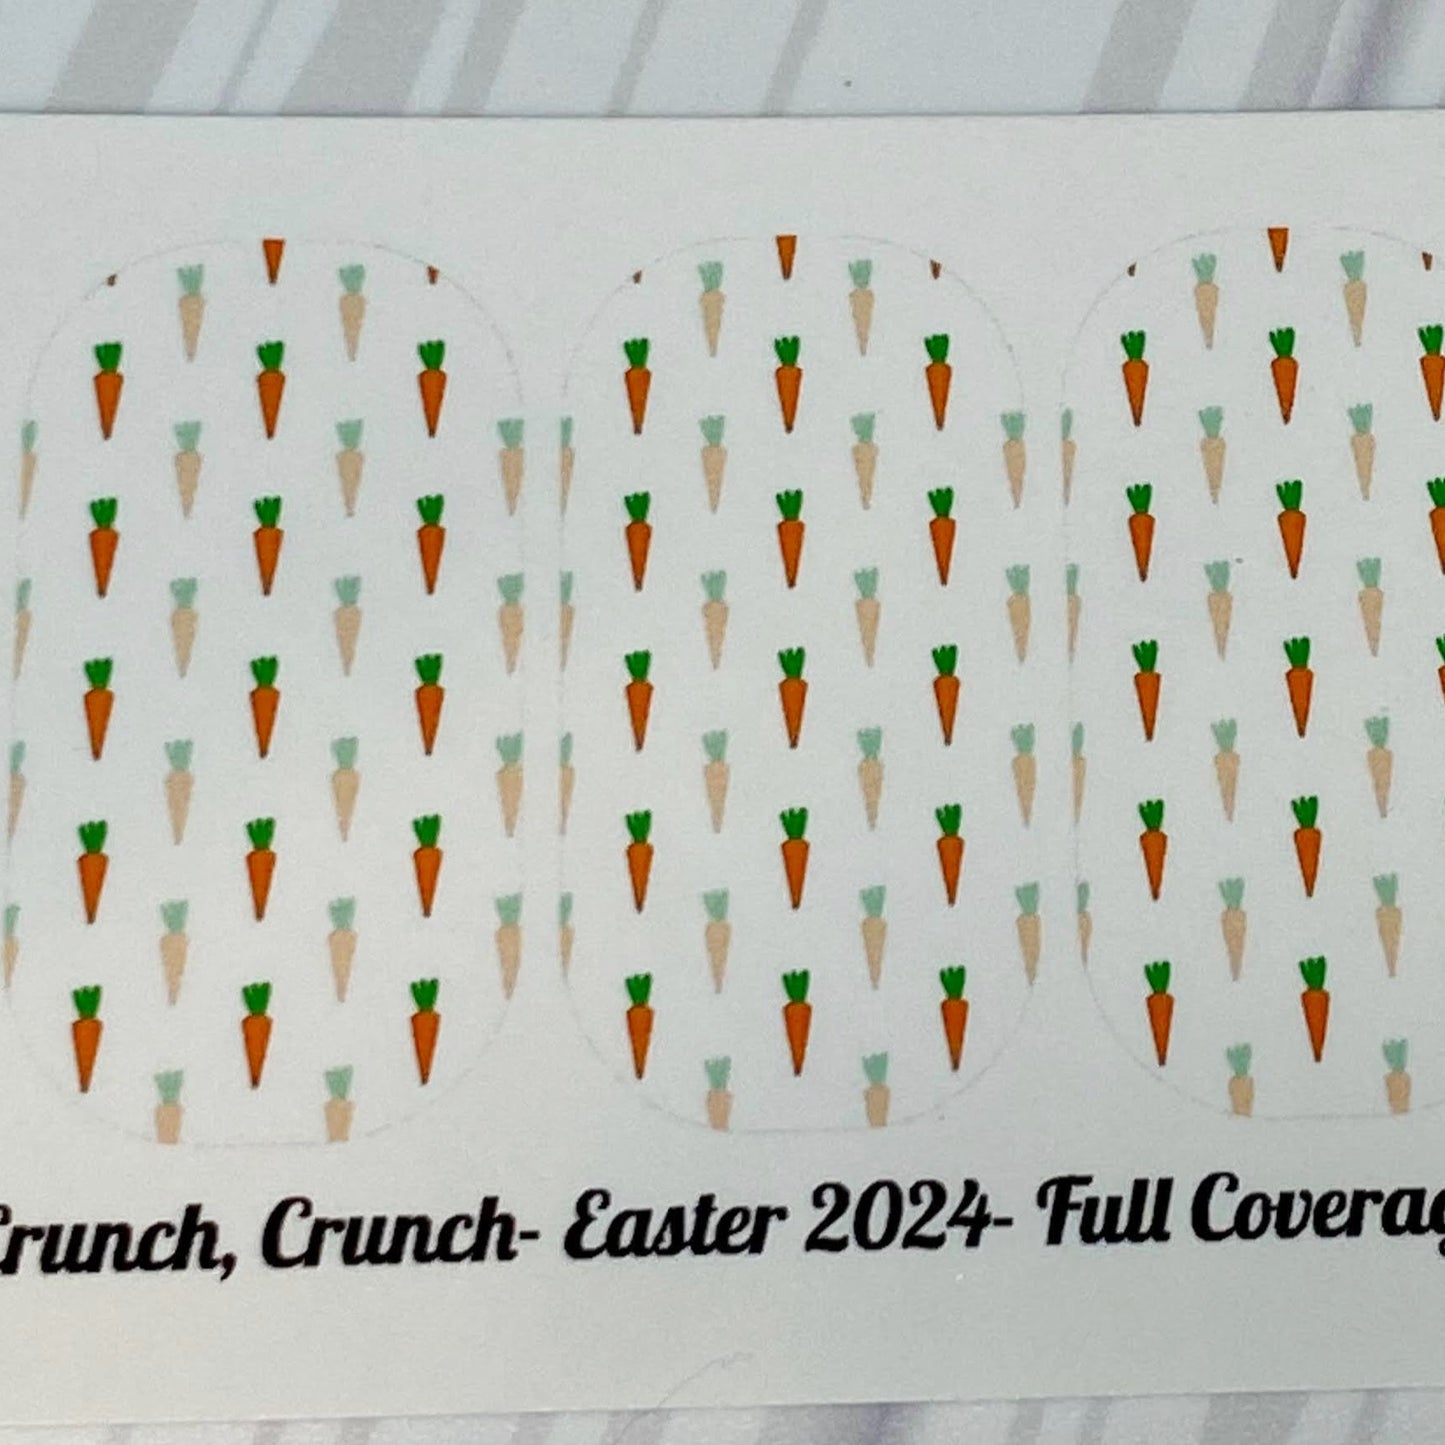 Crunch, Crunch - Full Coverage Nail Wraps